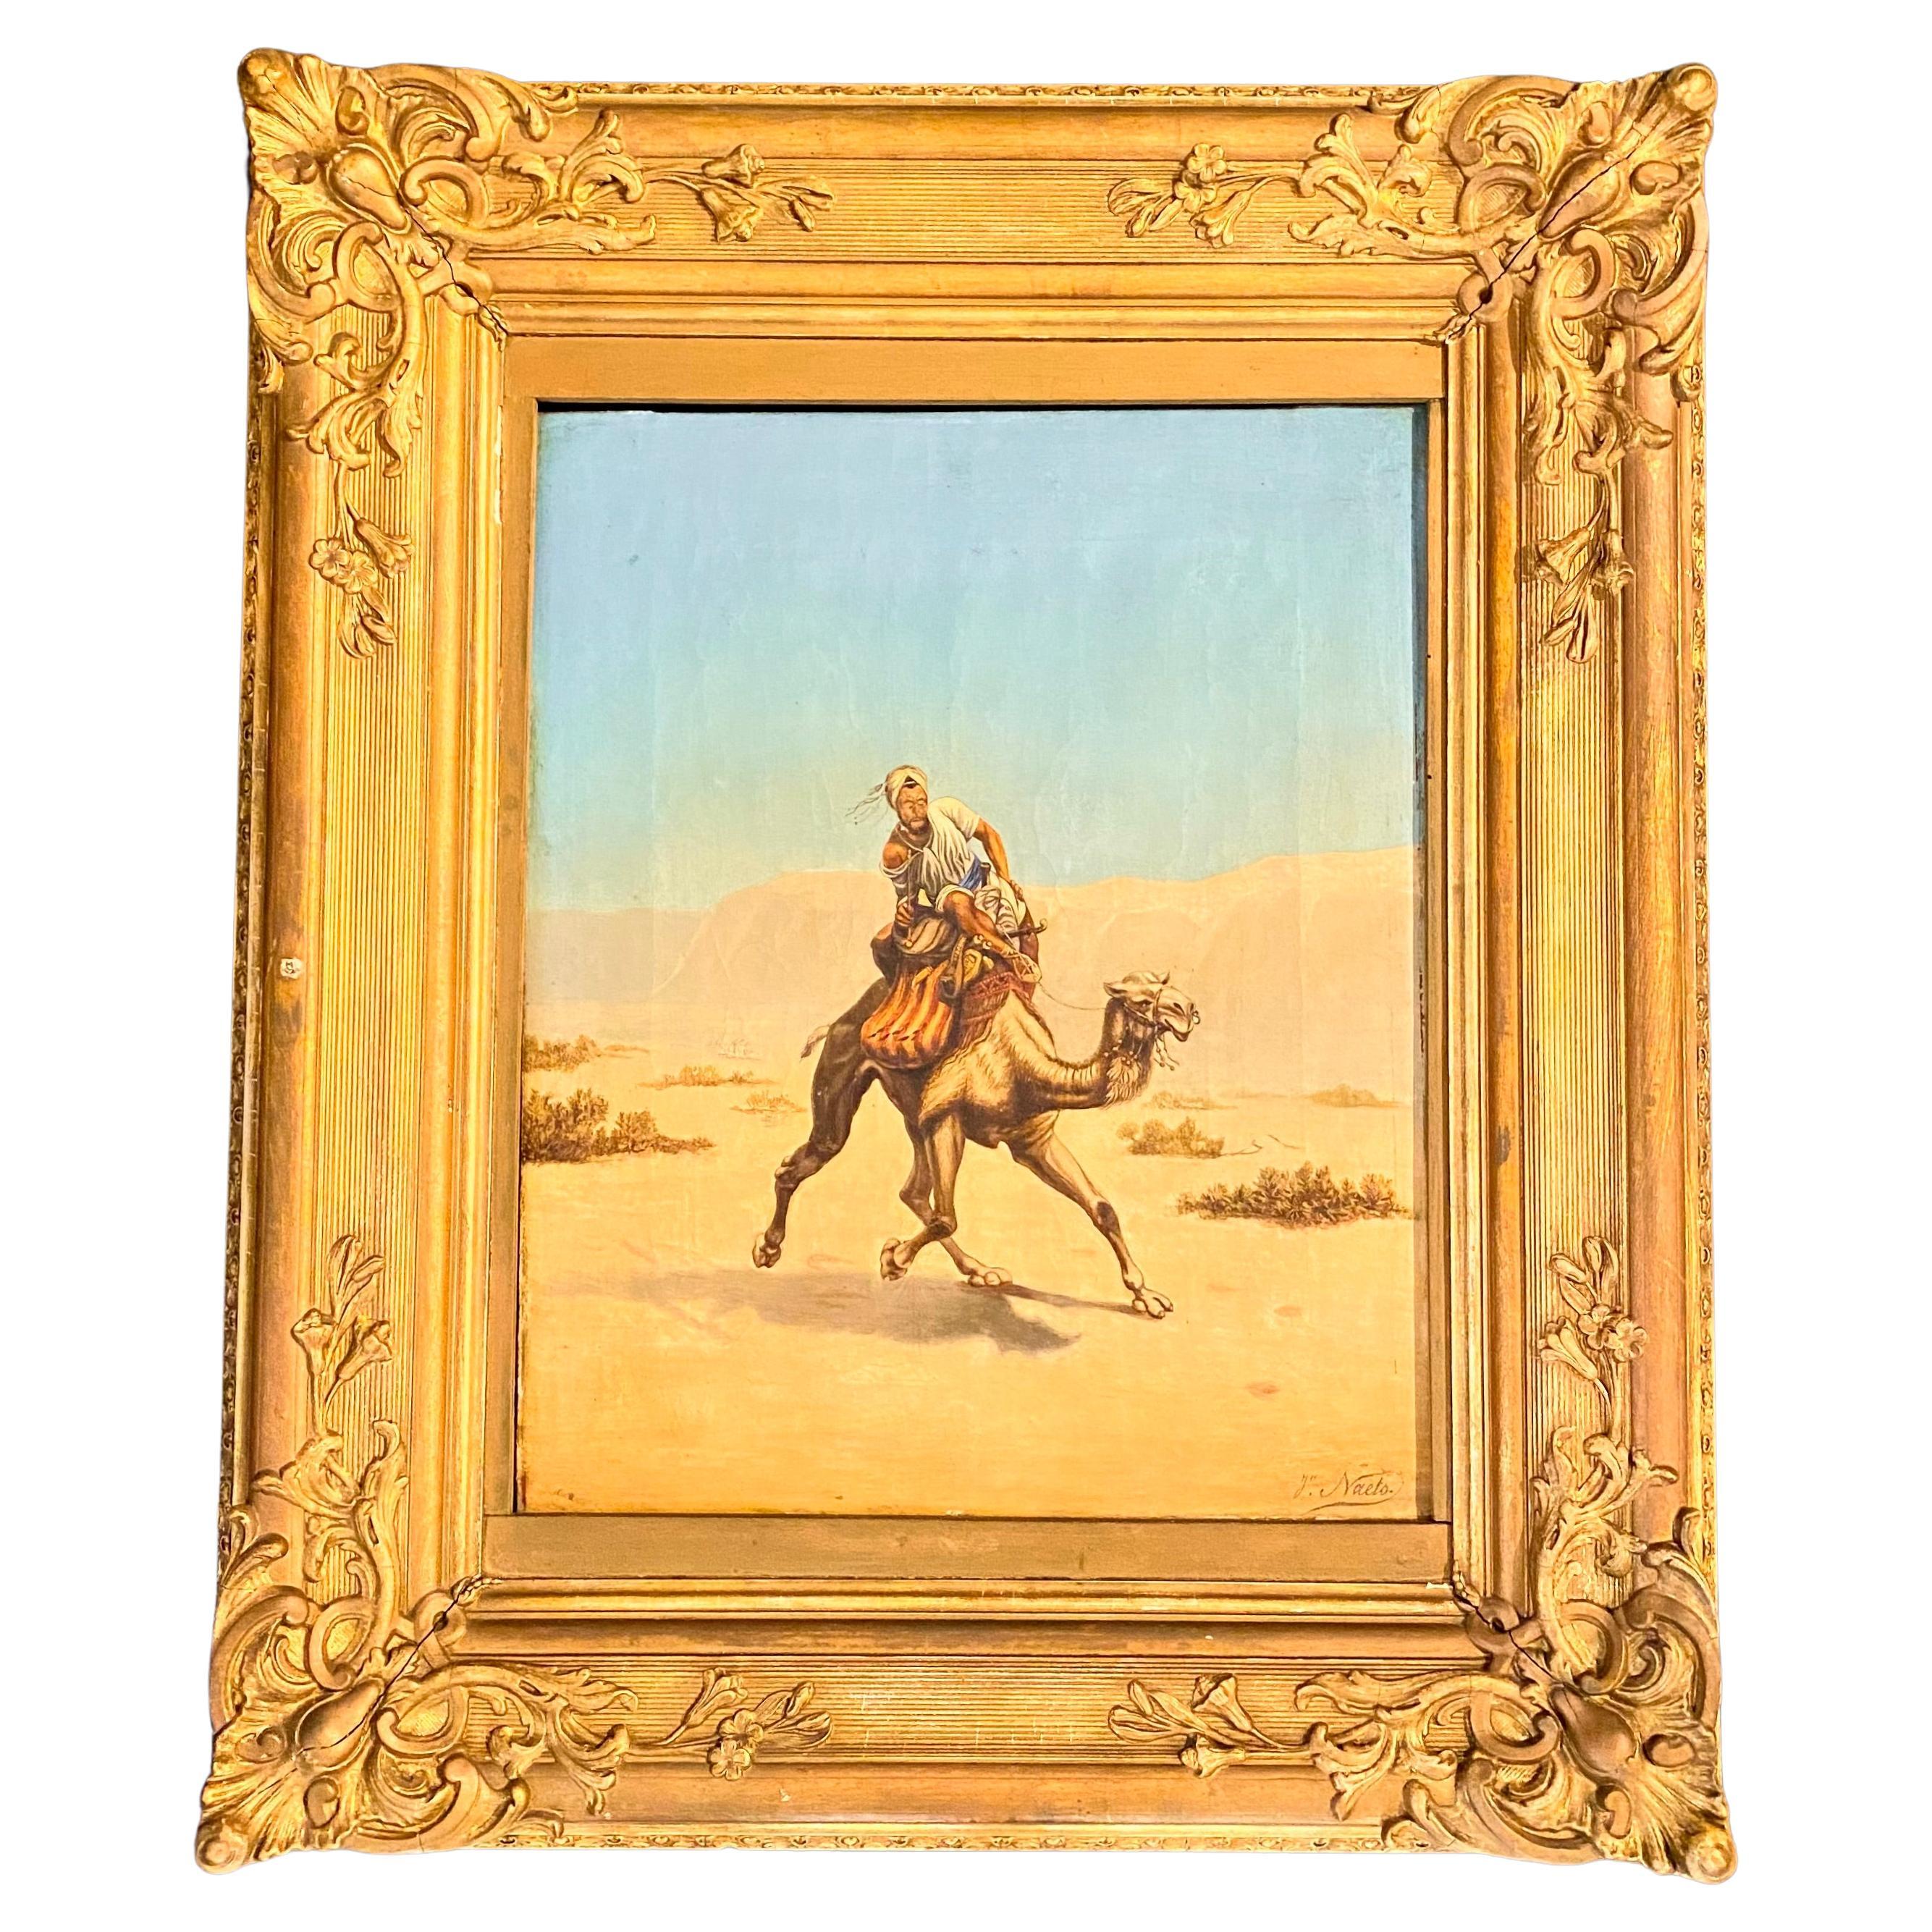 French Large Orientalist Painting, Signed "JH Naets", Oil on Canvas